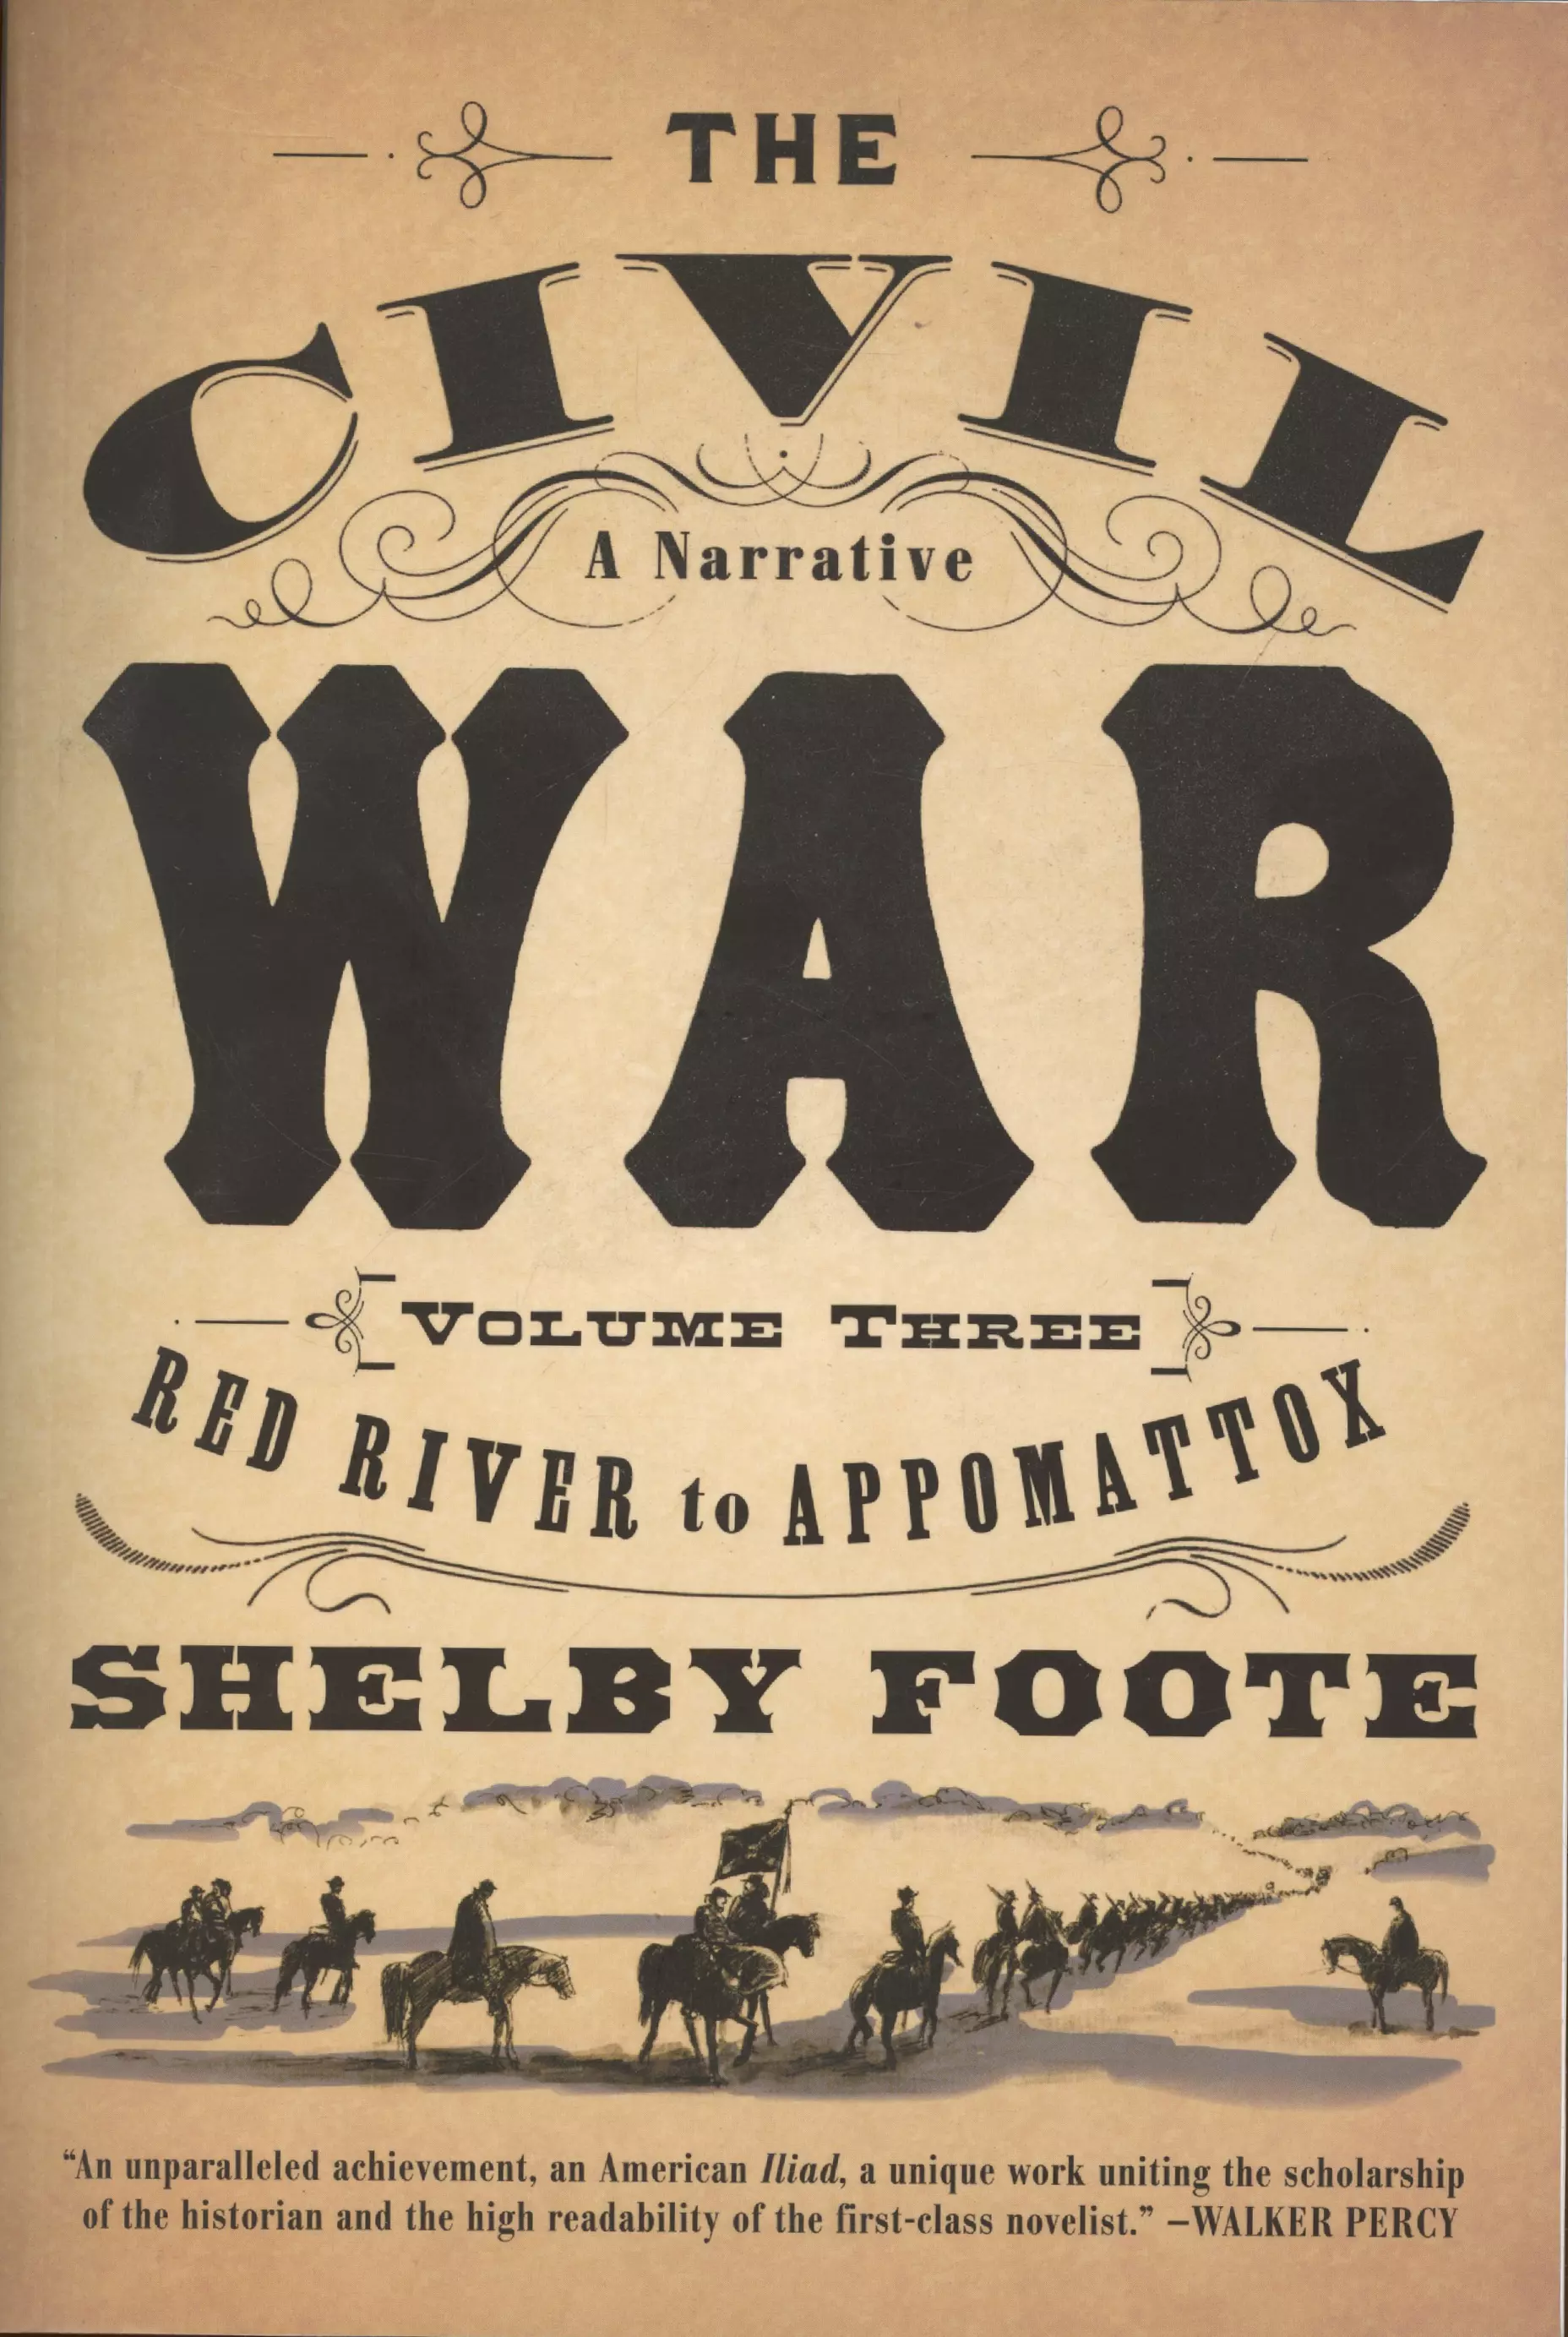 Foote Shelby - The Civil War: A Narrative: Volume 3: Red River to Appomattox